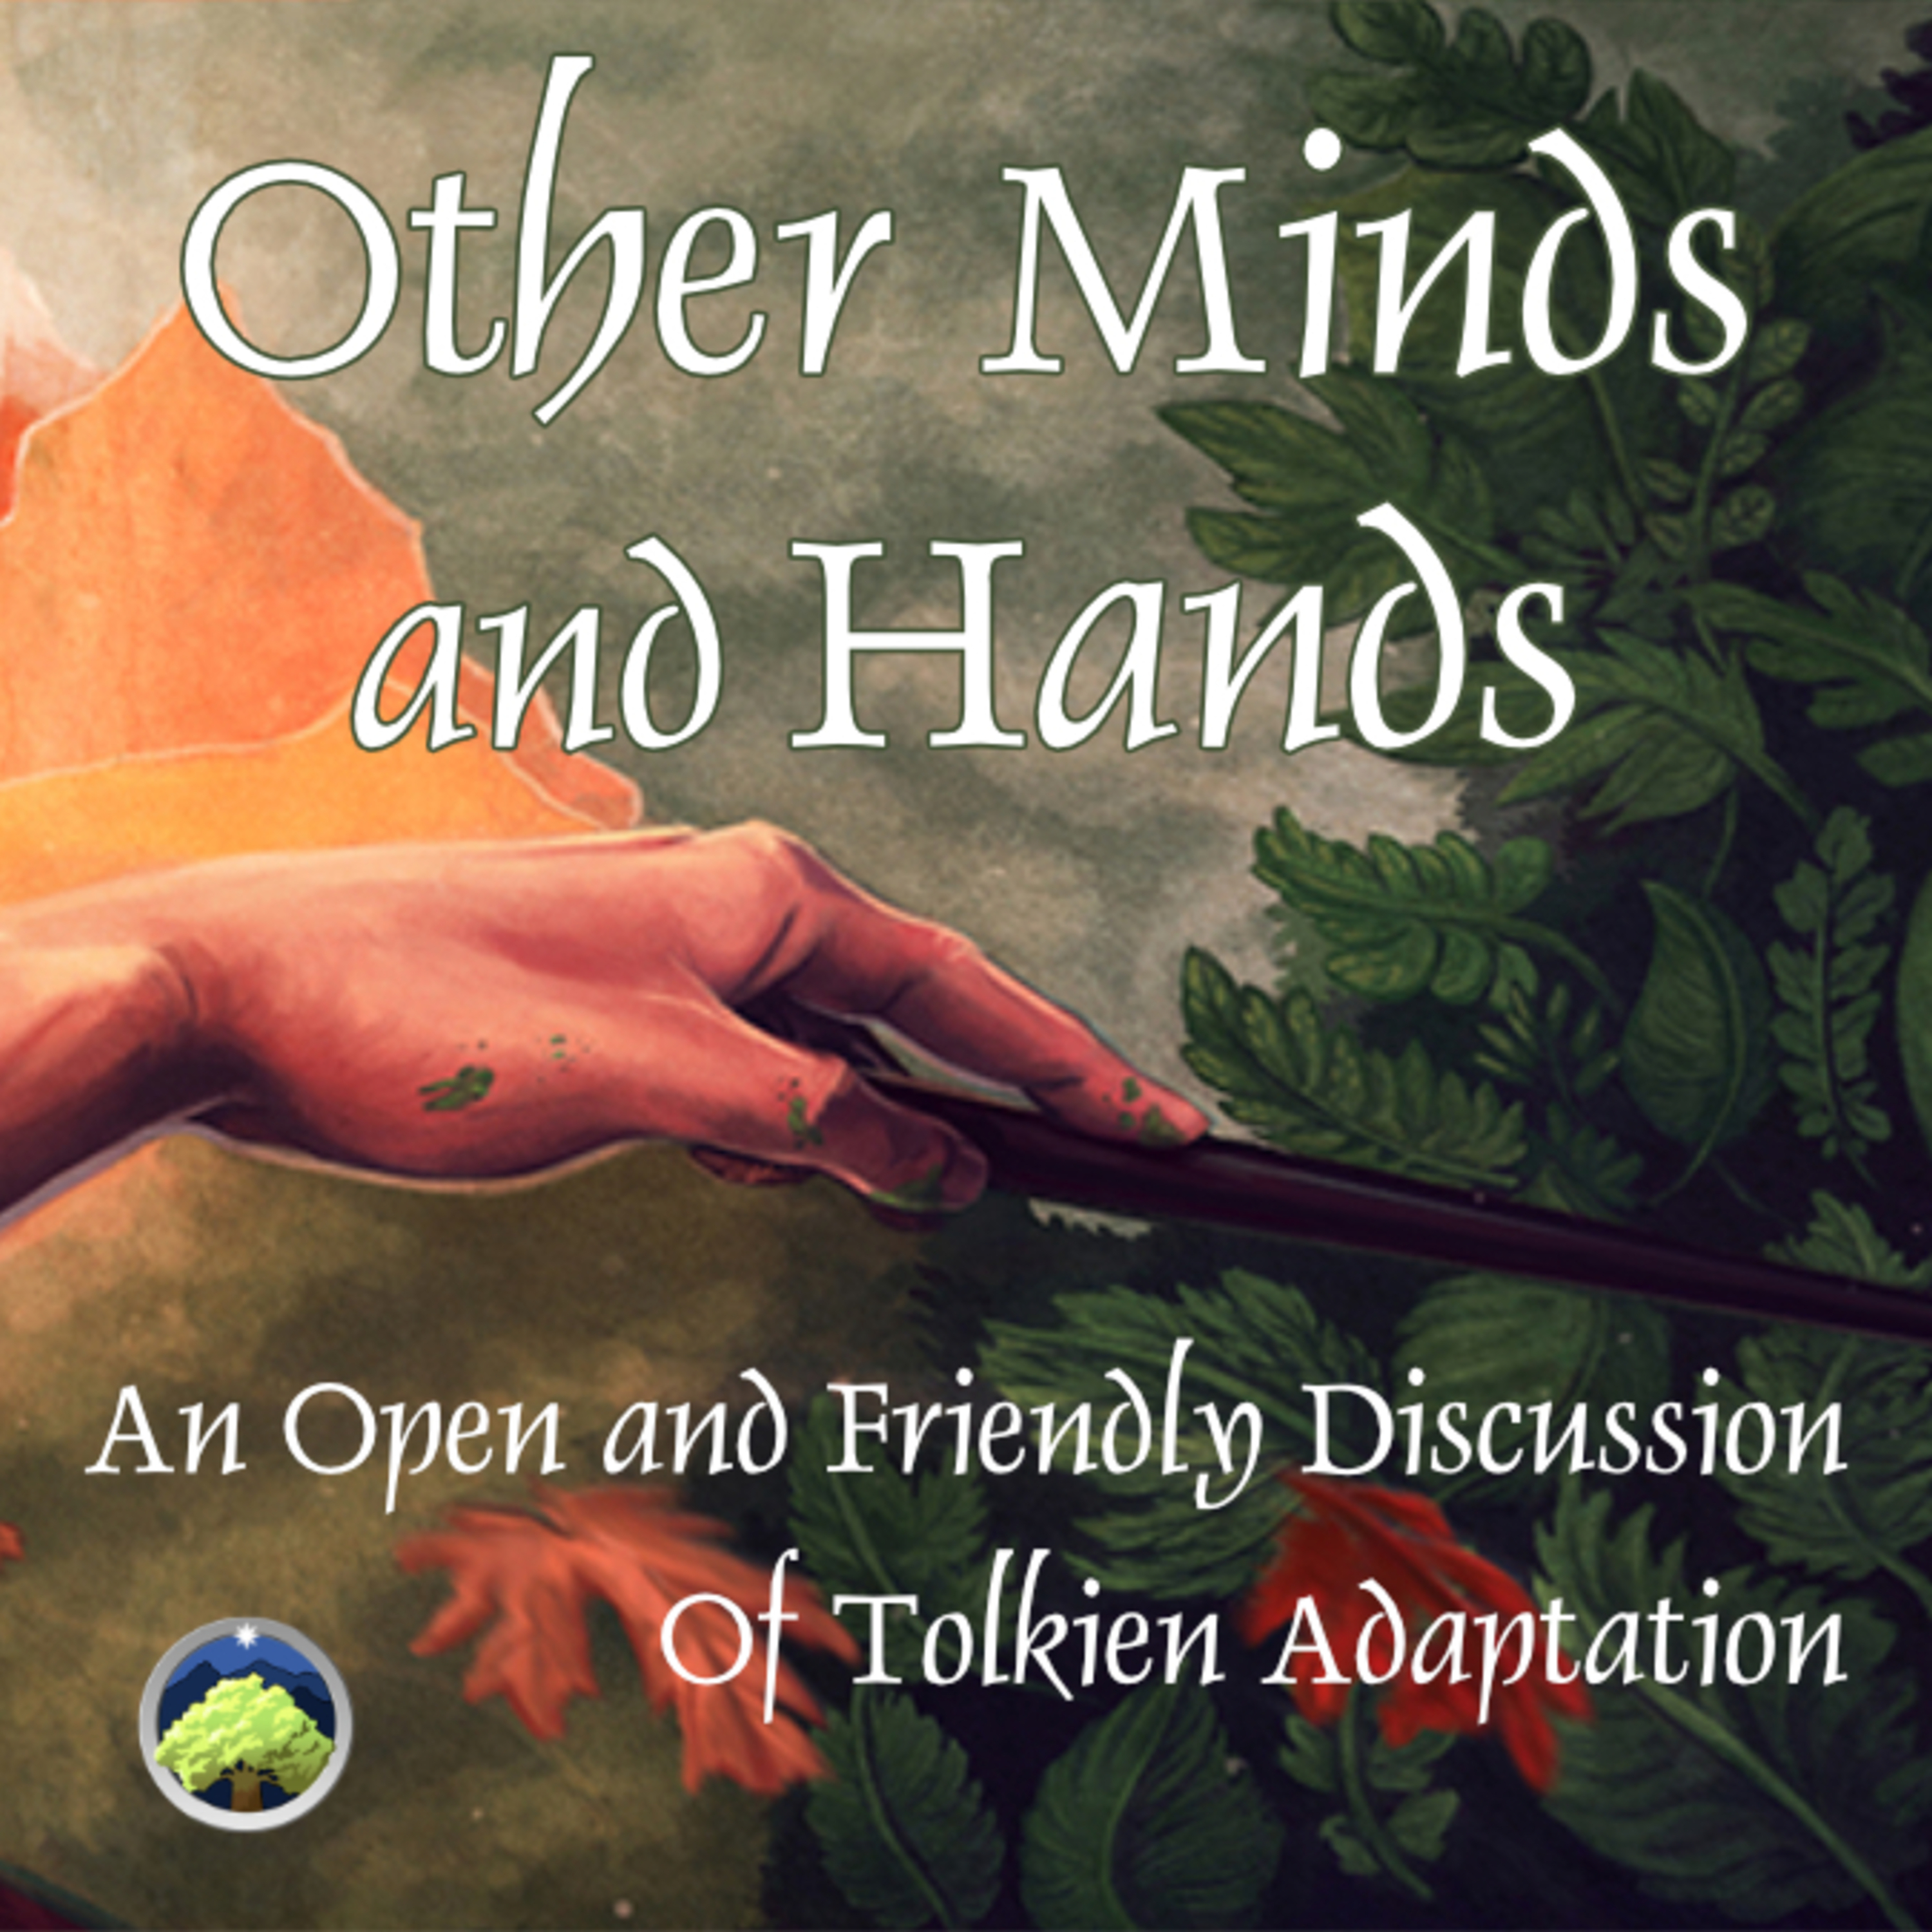 461: Other Minds and Hands, Episode 1